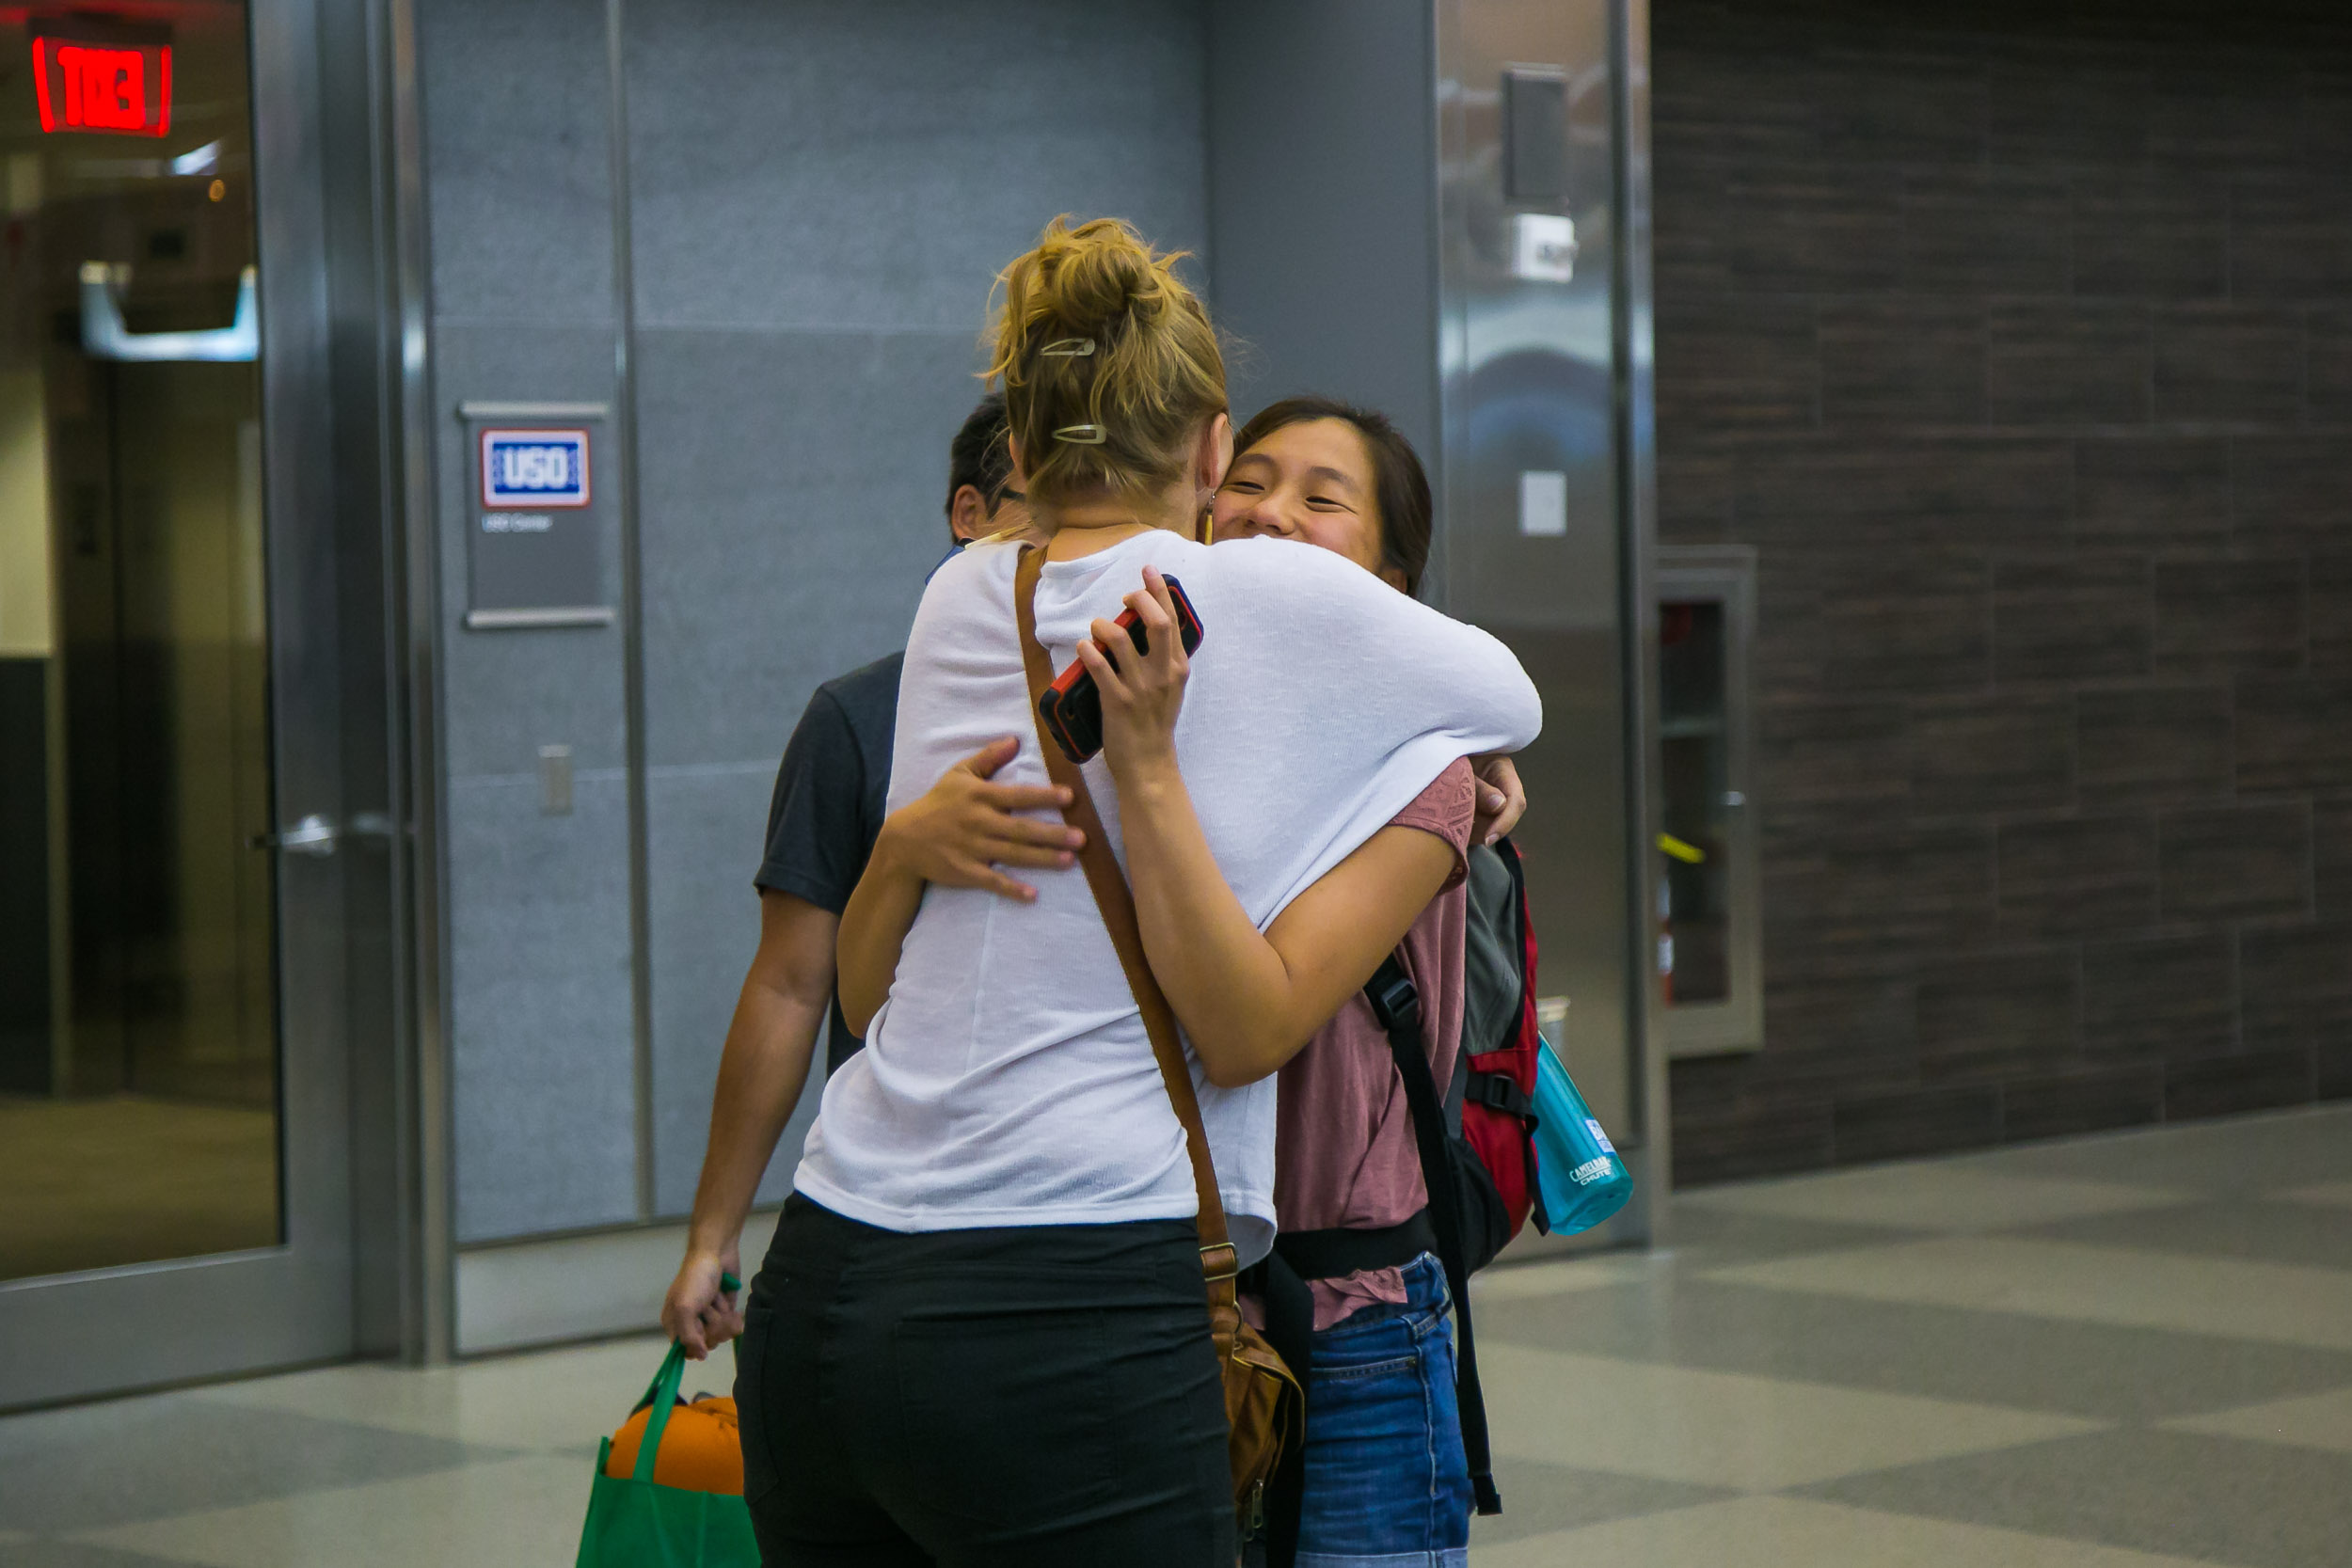 Raleigh Engagement Photographer | G. Lin Photography | Woman hugging friend at airport